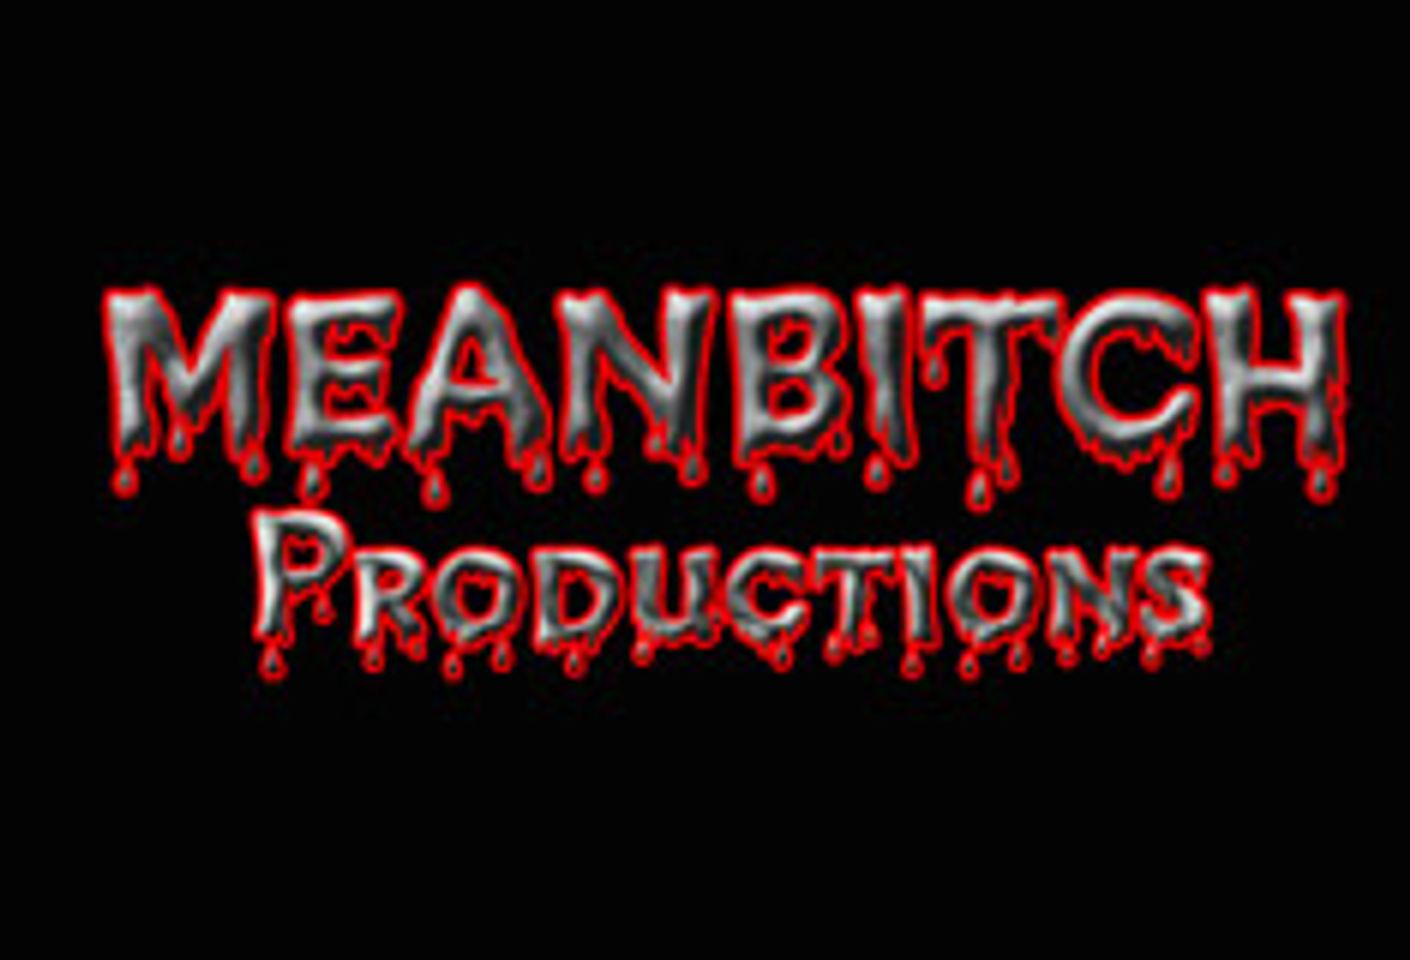 MeanBitch Productions Signs with Gentlemen's Video